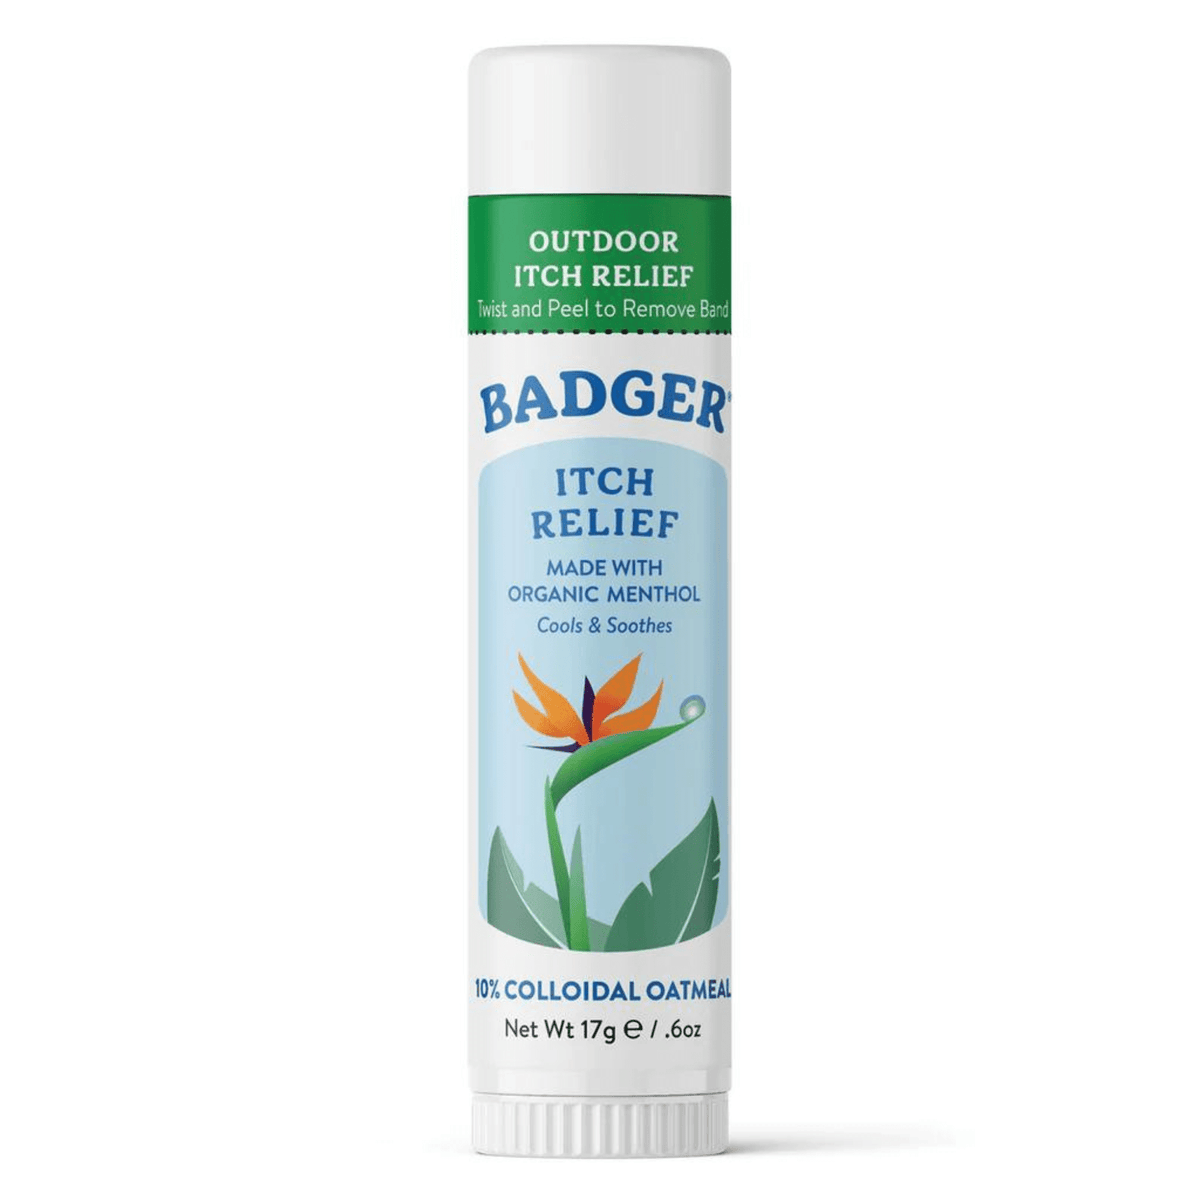 Primary Image of Outdoor Itch Relief Stick